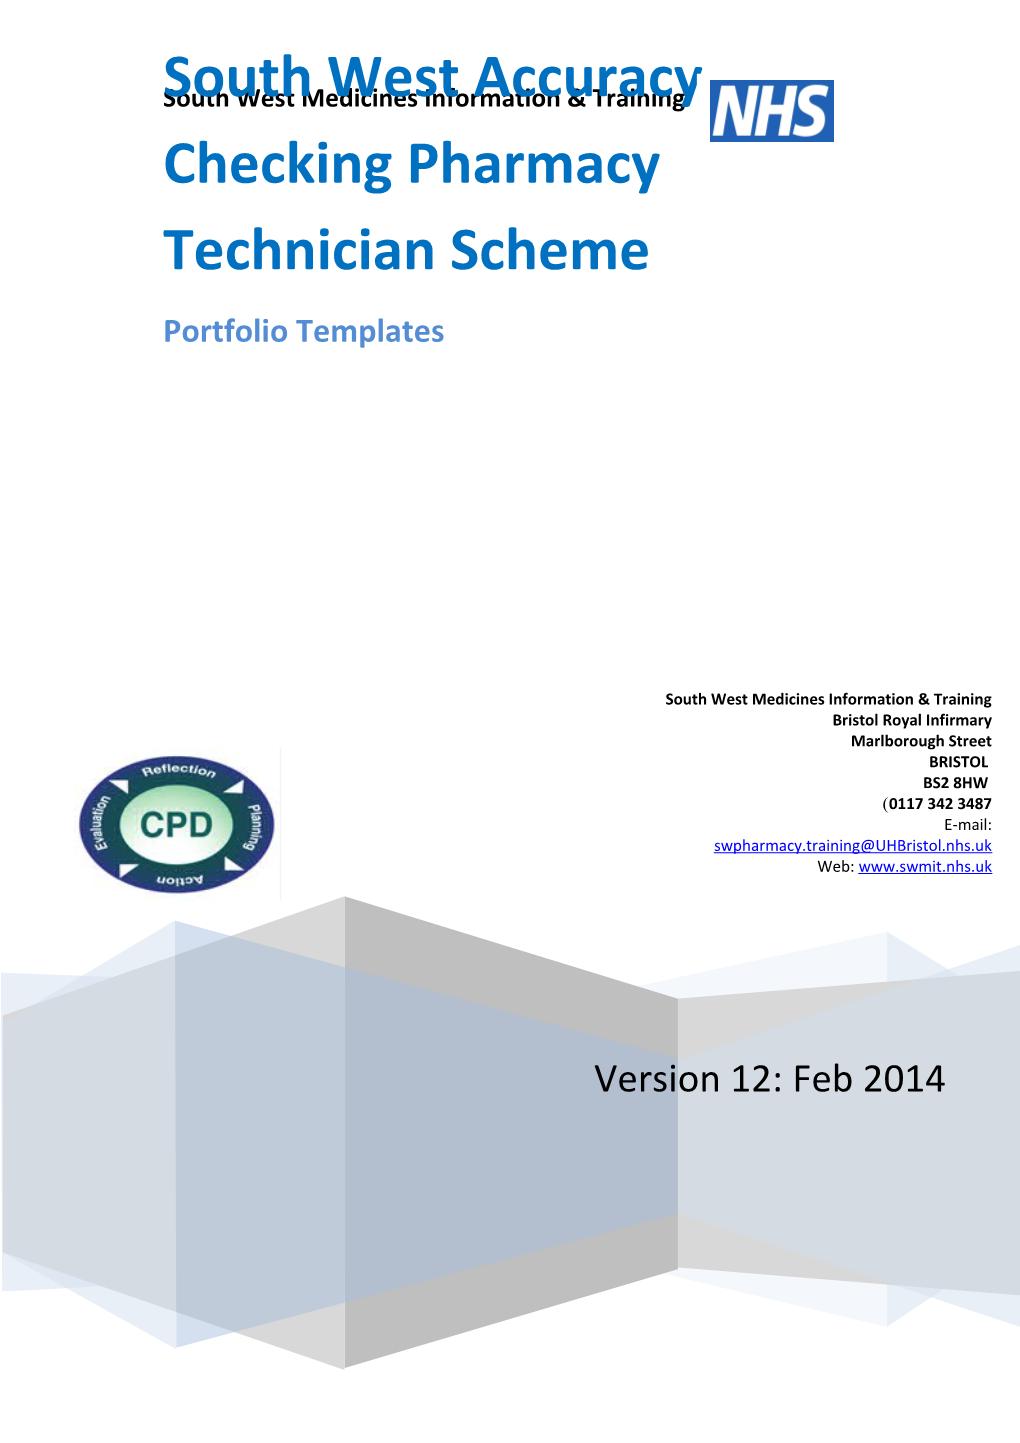 South West Accuracy Checking Pharmacy Technician Scheme